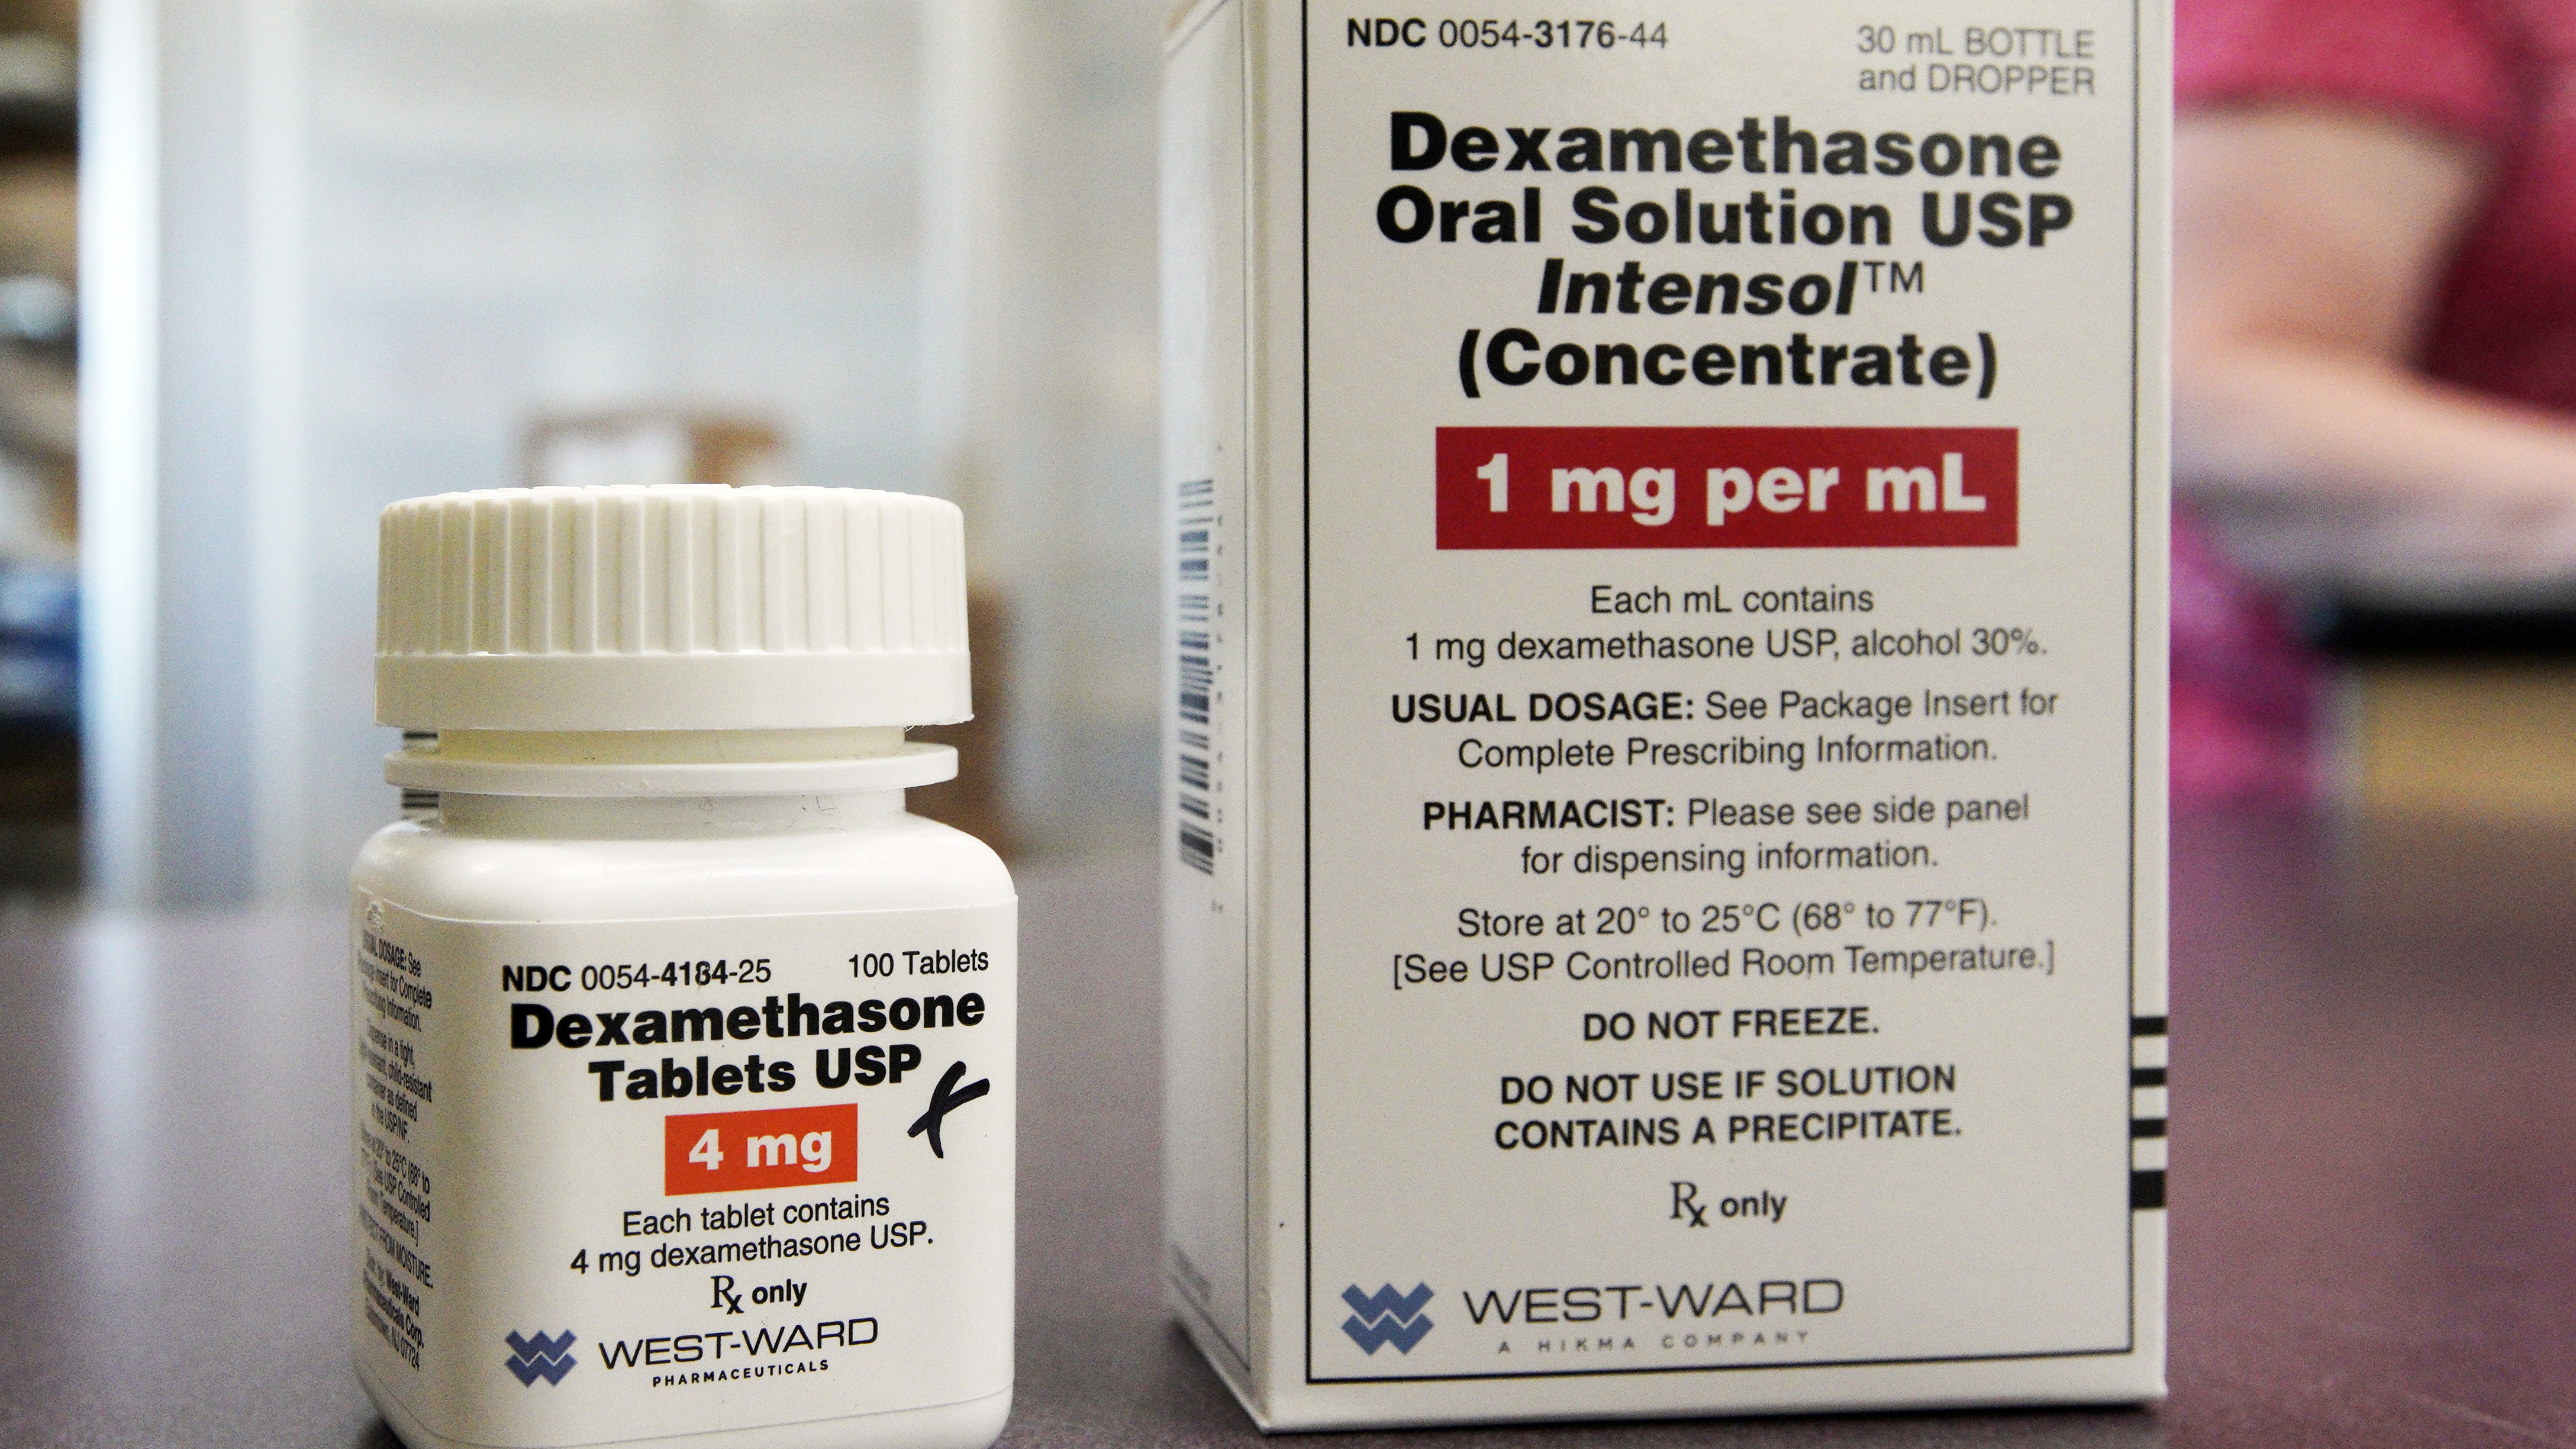 A bottle of Dexamethasone in a pharmacy in Omaha, Nebraska, USA. Donald Trump is said to have been given the drug for coronavirus.